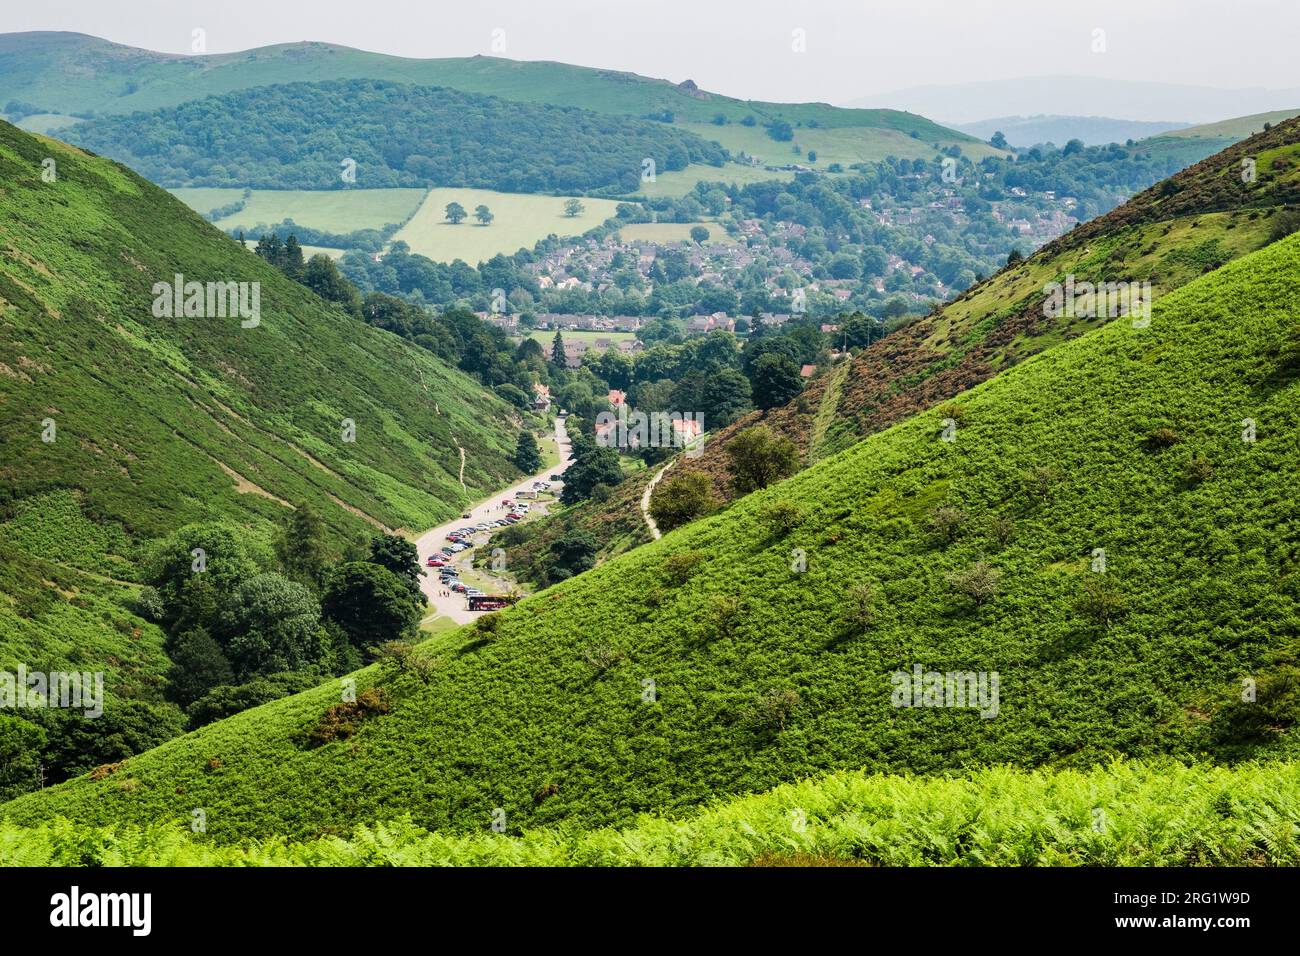 Bracken covered hillside on Long Mynd above Carding Mill Valley with Church Stretton beyond. Shropshire, England, UK, Britain Stock Photo